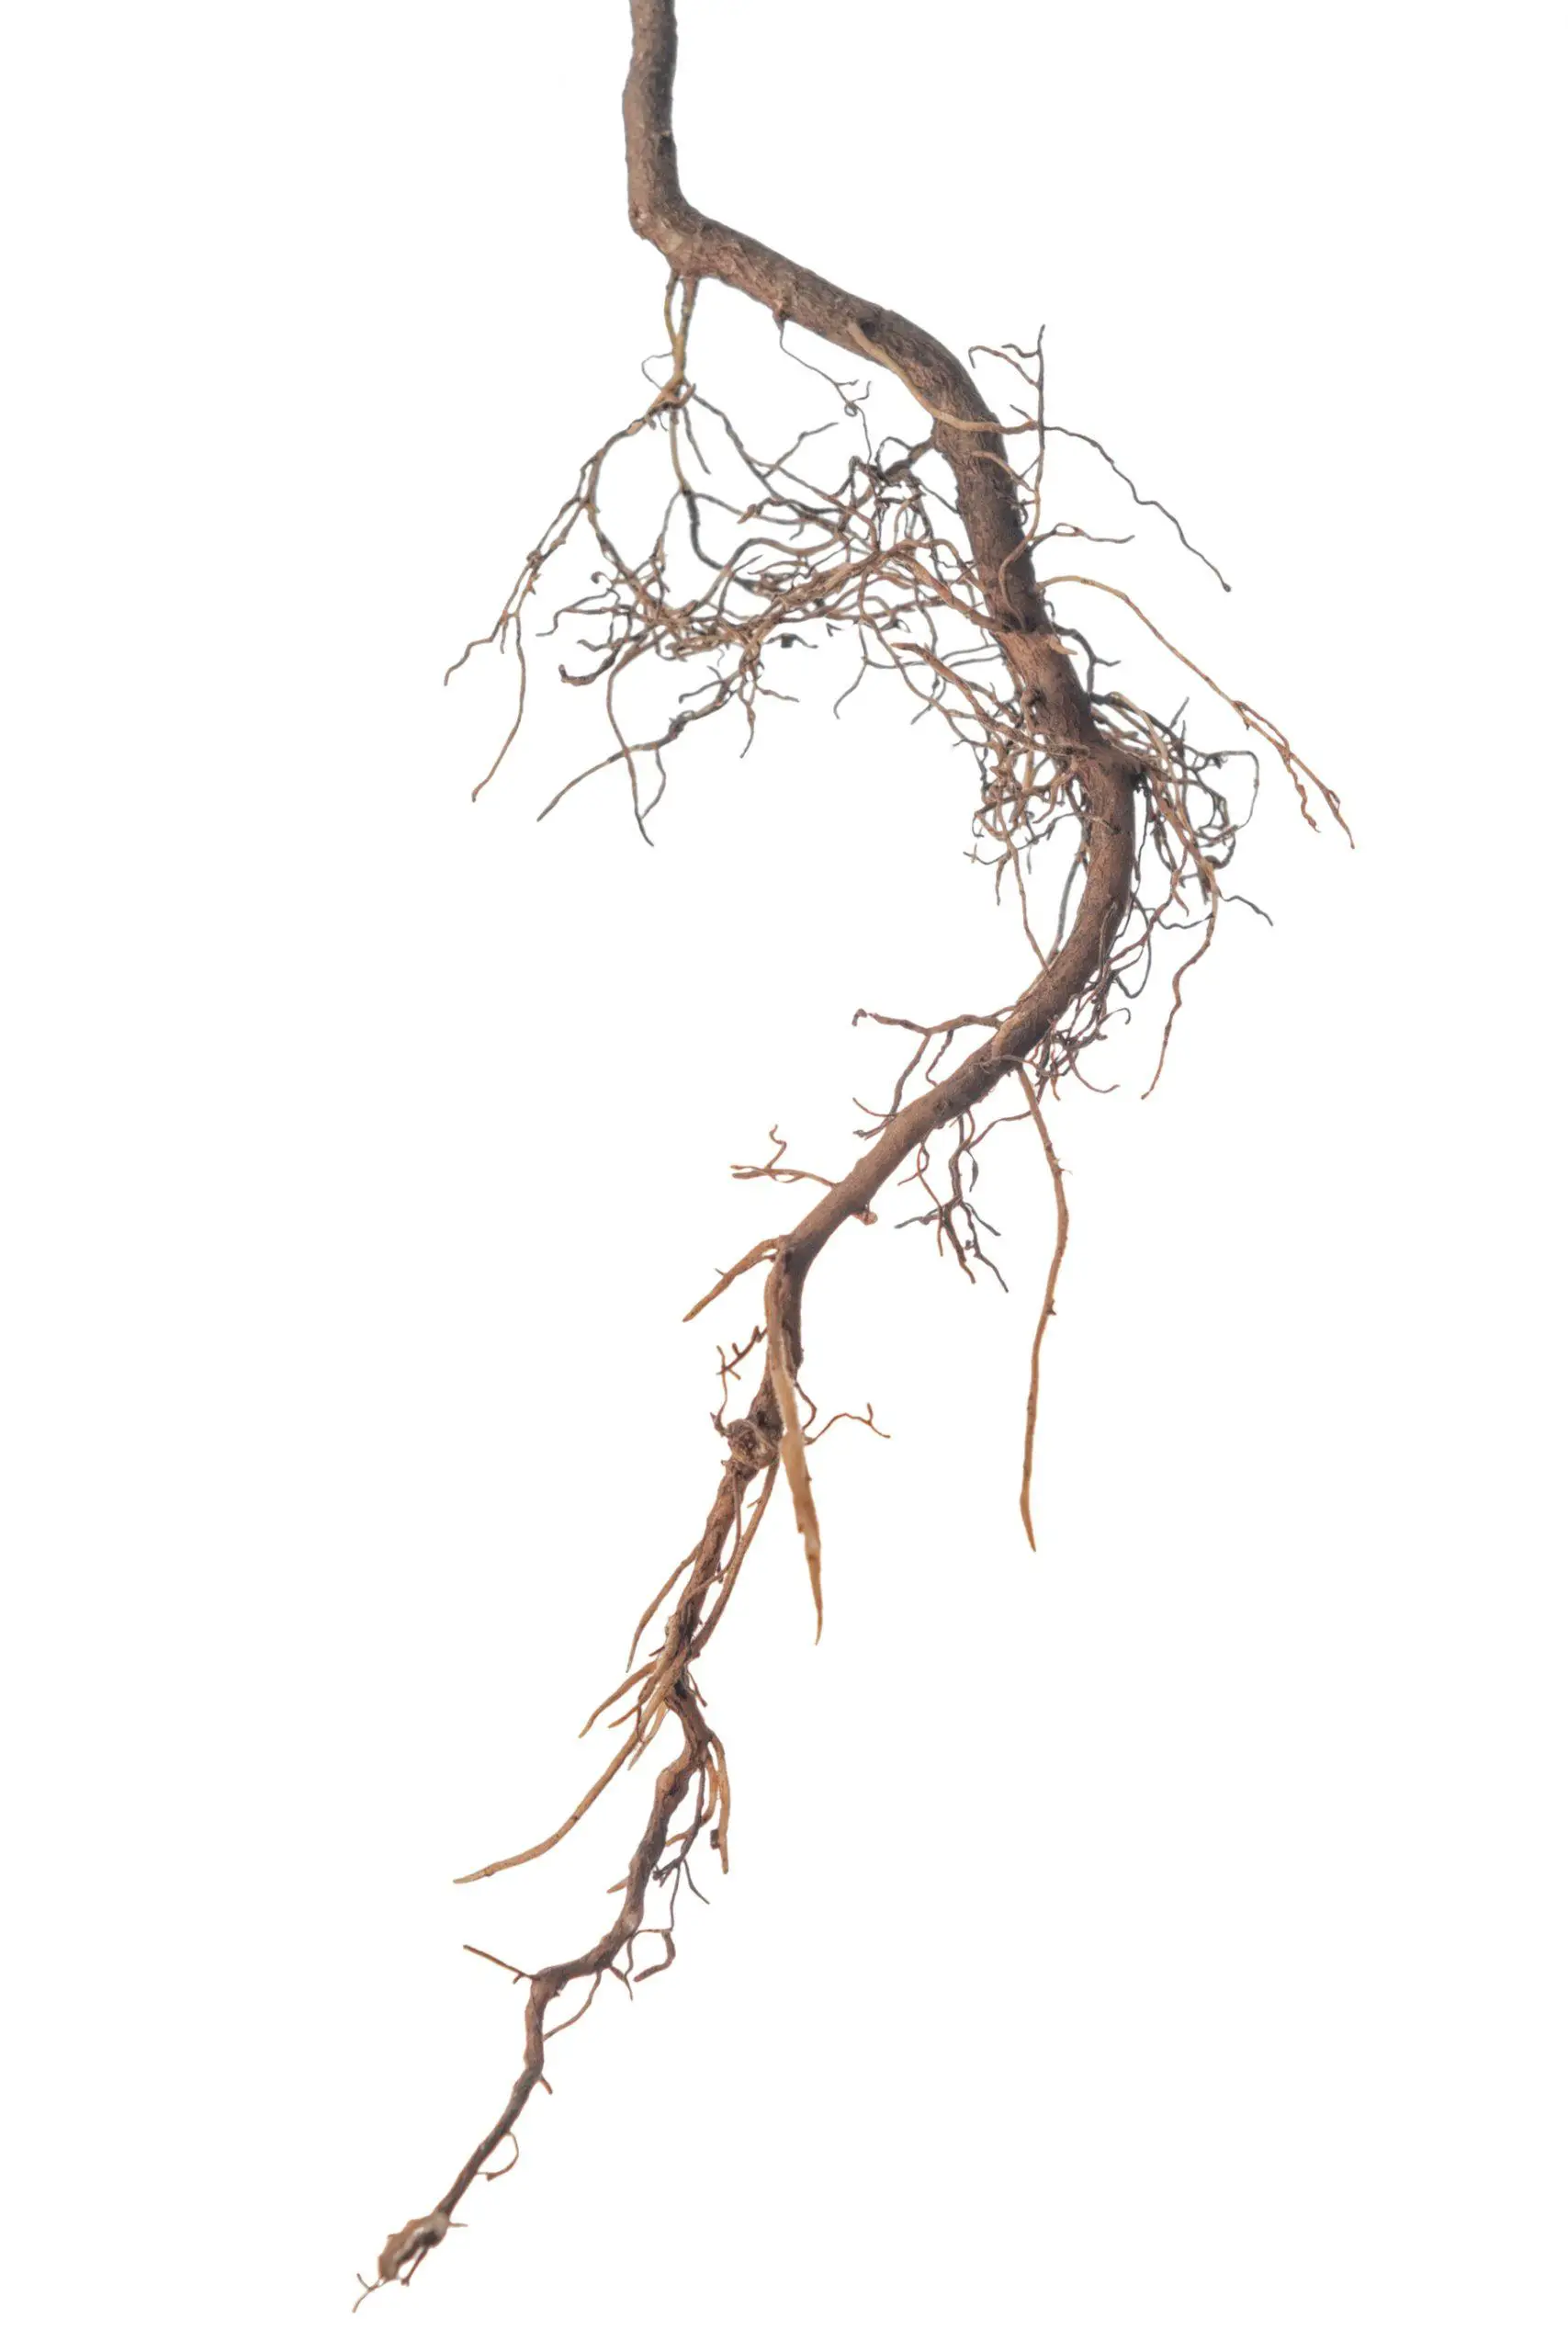 Rhizomes have many shoots attached them and grow horizontal as well as vertical